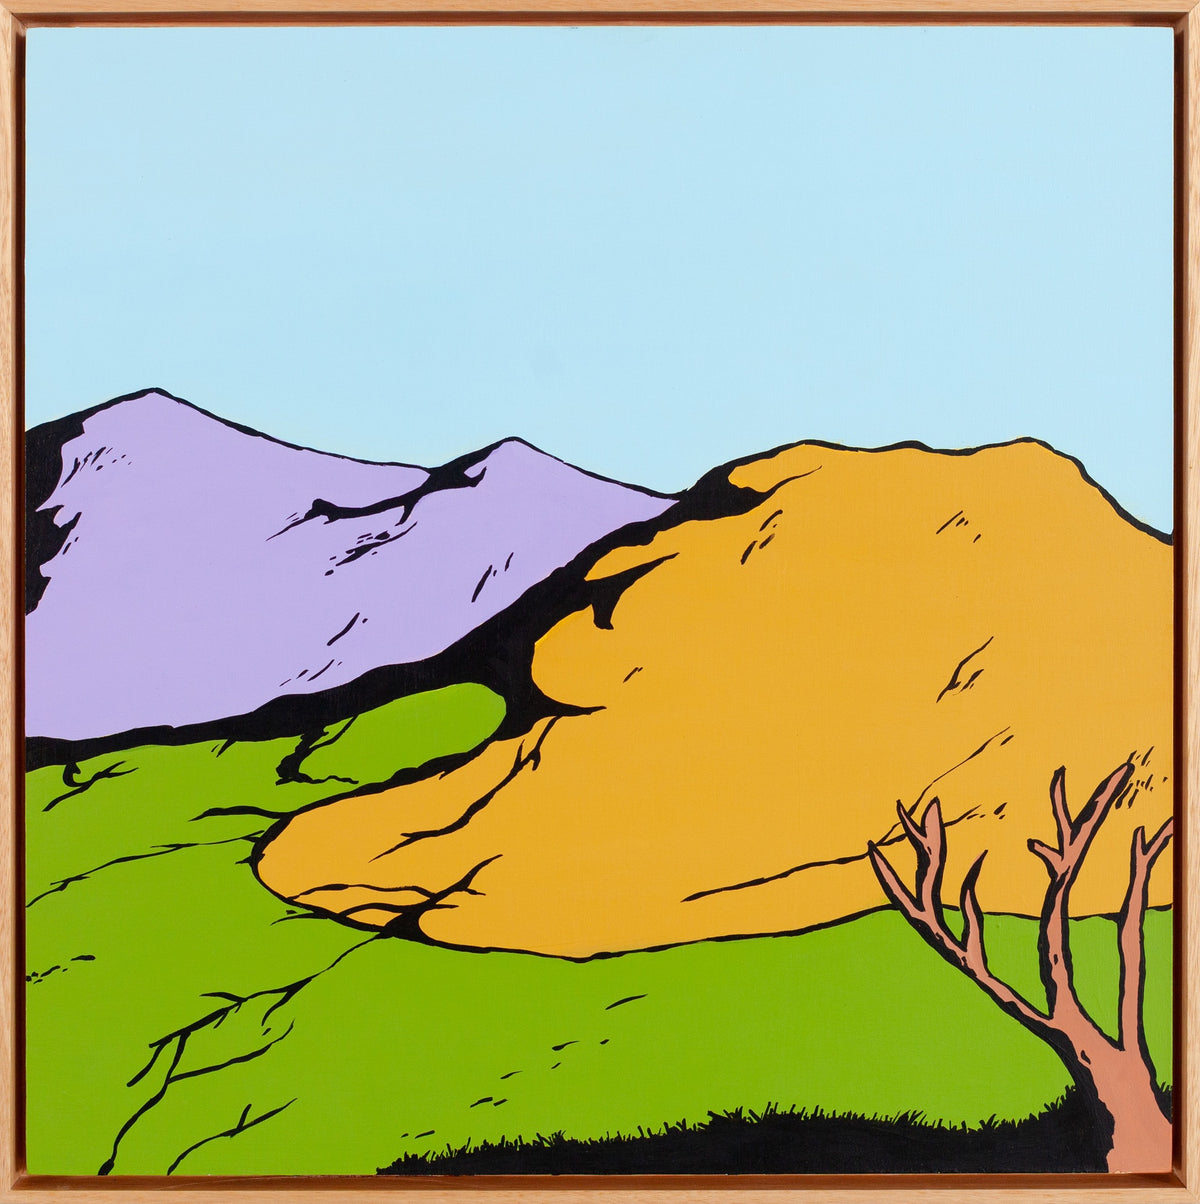 Hills (and Tree)